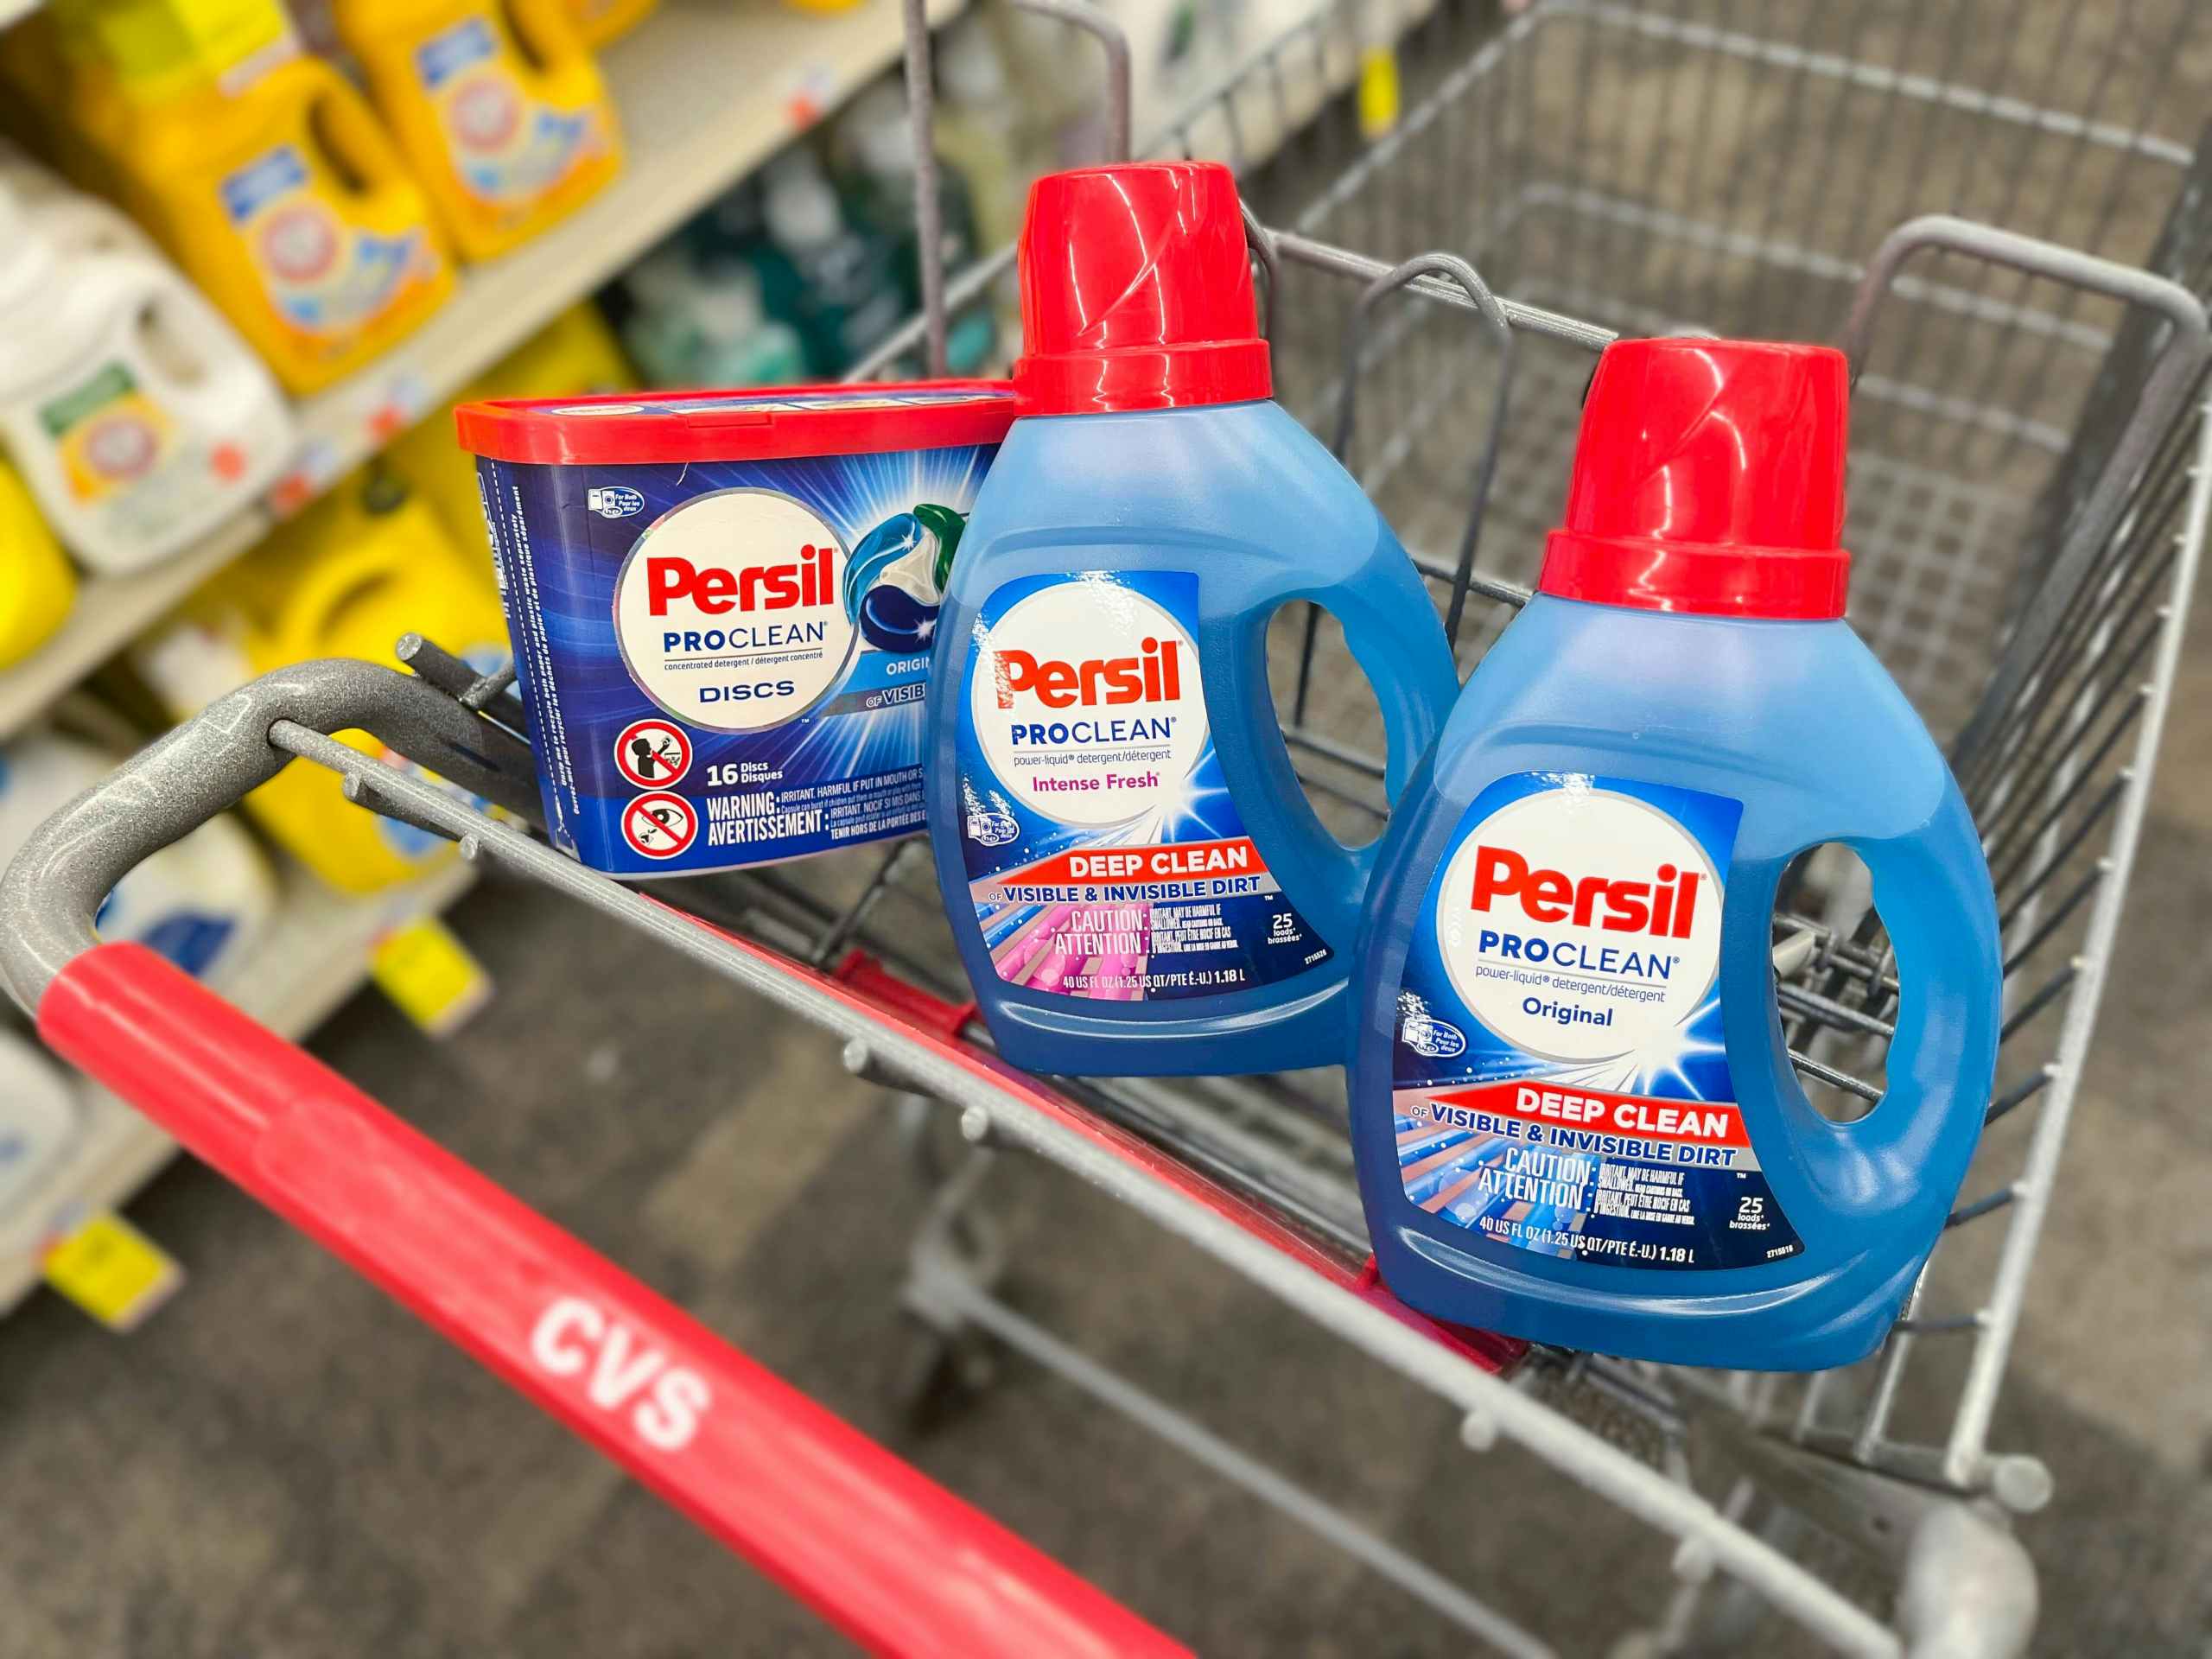 one Persil discs and two bottles of Persil detergent inside shopping cart